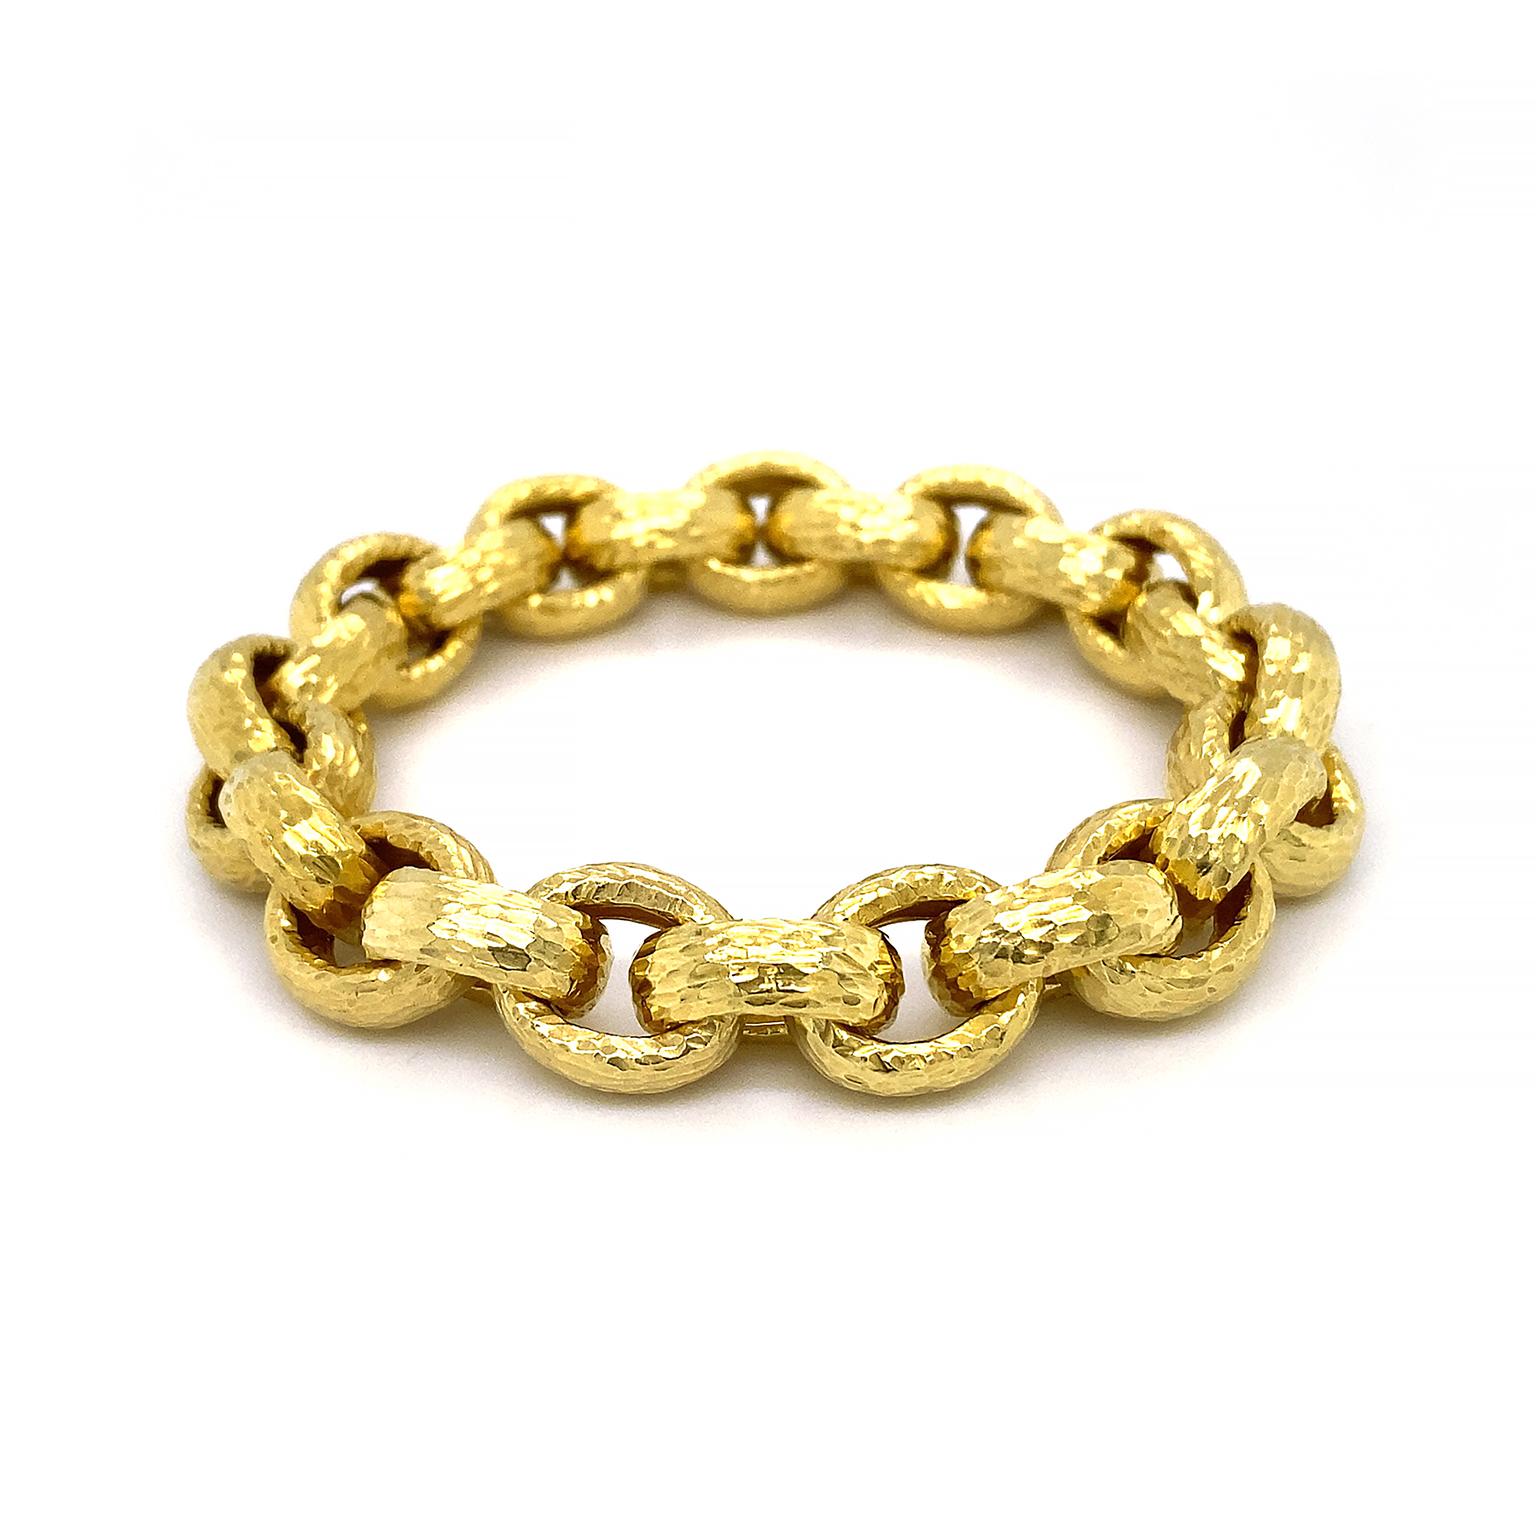 Ovals made of 18k yellow gold connect together. Throughout the bracelet is a hammer texture, which creates a patina for a classical flair. A hidden clasp secures the bracelet, which measures 0.52 inches (width) by 7.88 inches (length).